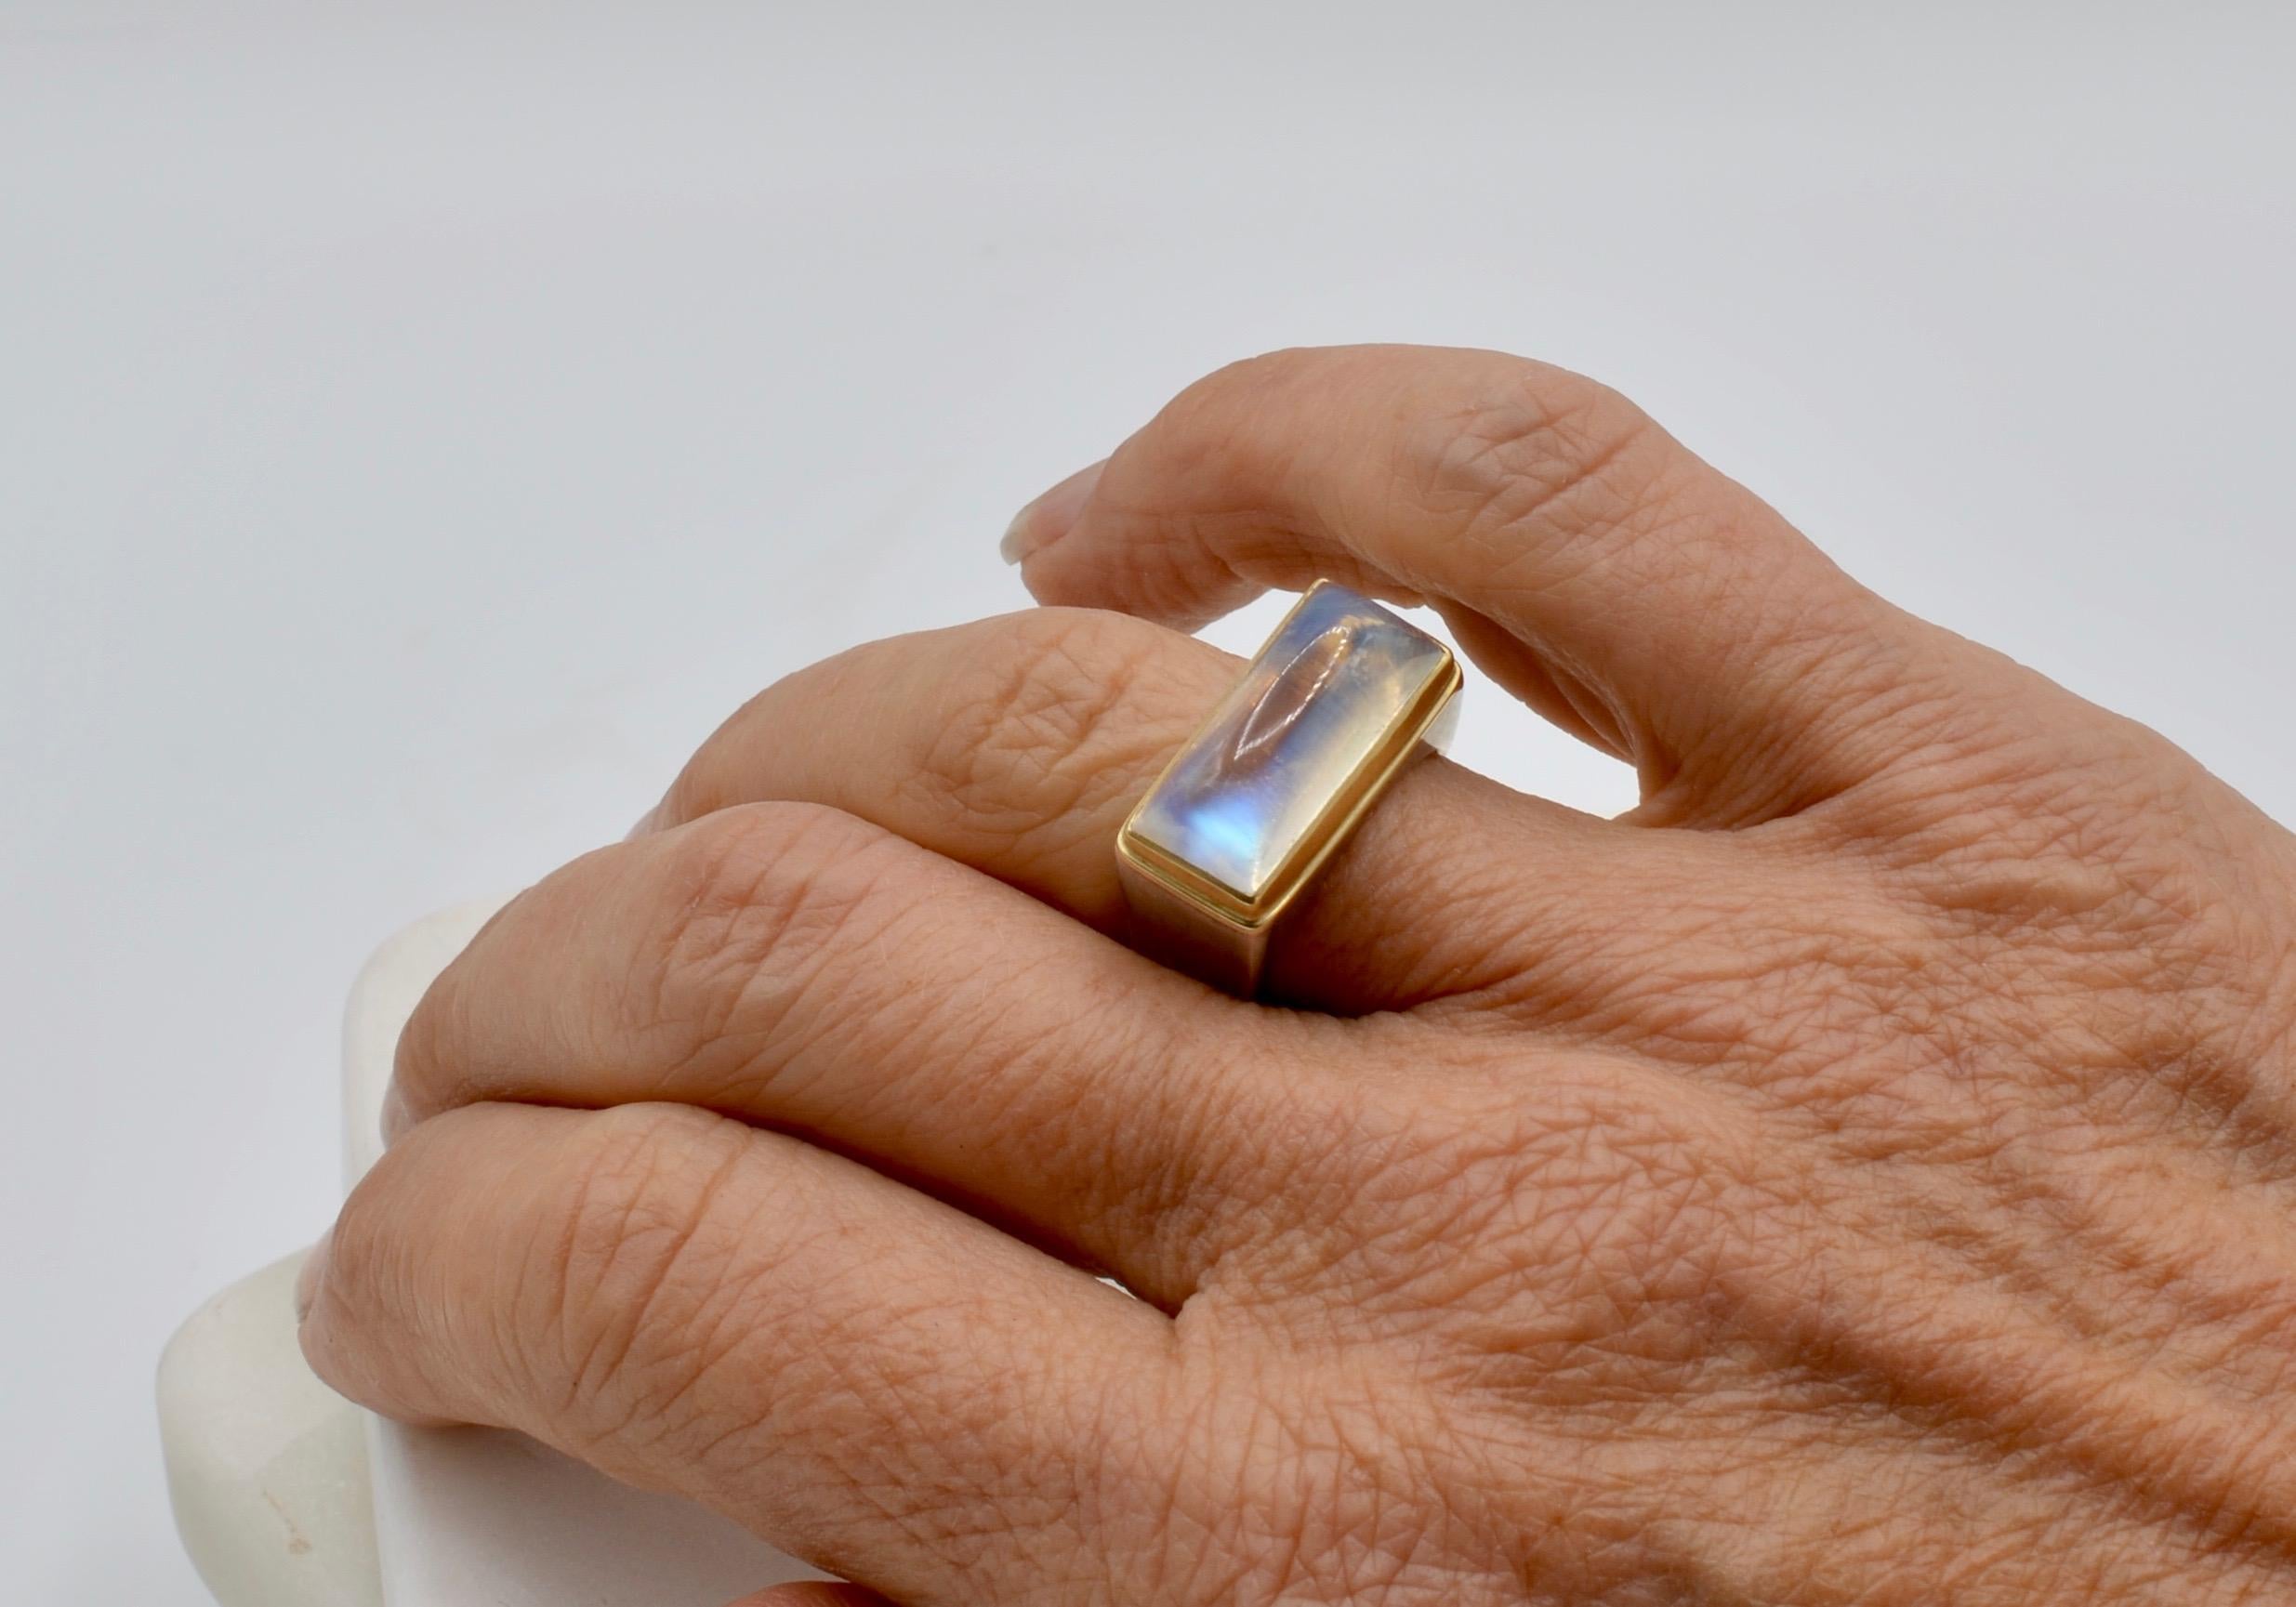 This rectangle  Steven Battelle designed moonstone ring is cut to reflect the rainbow of the moonstone beautifully. It is accented by a 18 karat yellow bezel and set in a modern chunky sterling silver setting. The ring style is masculine and the